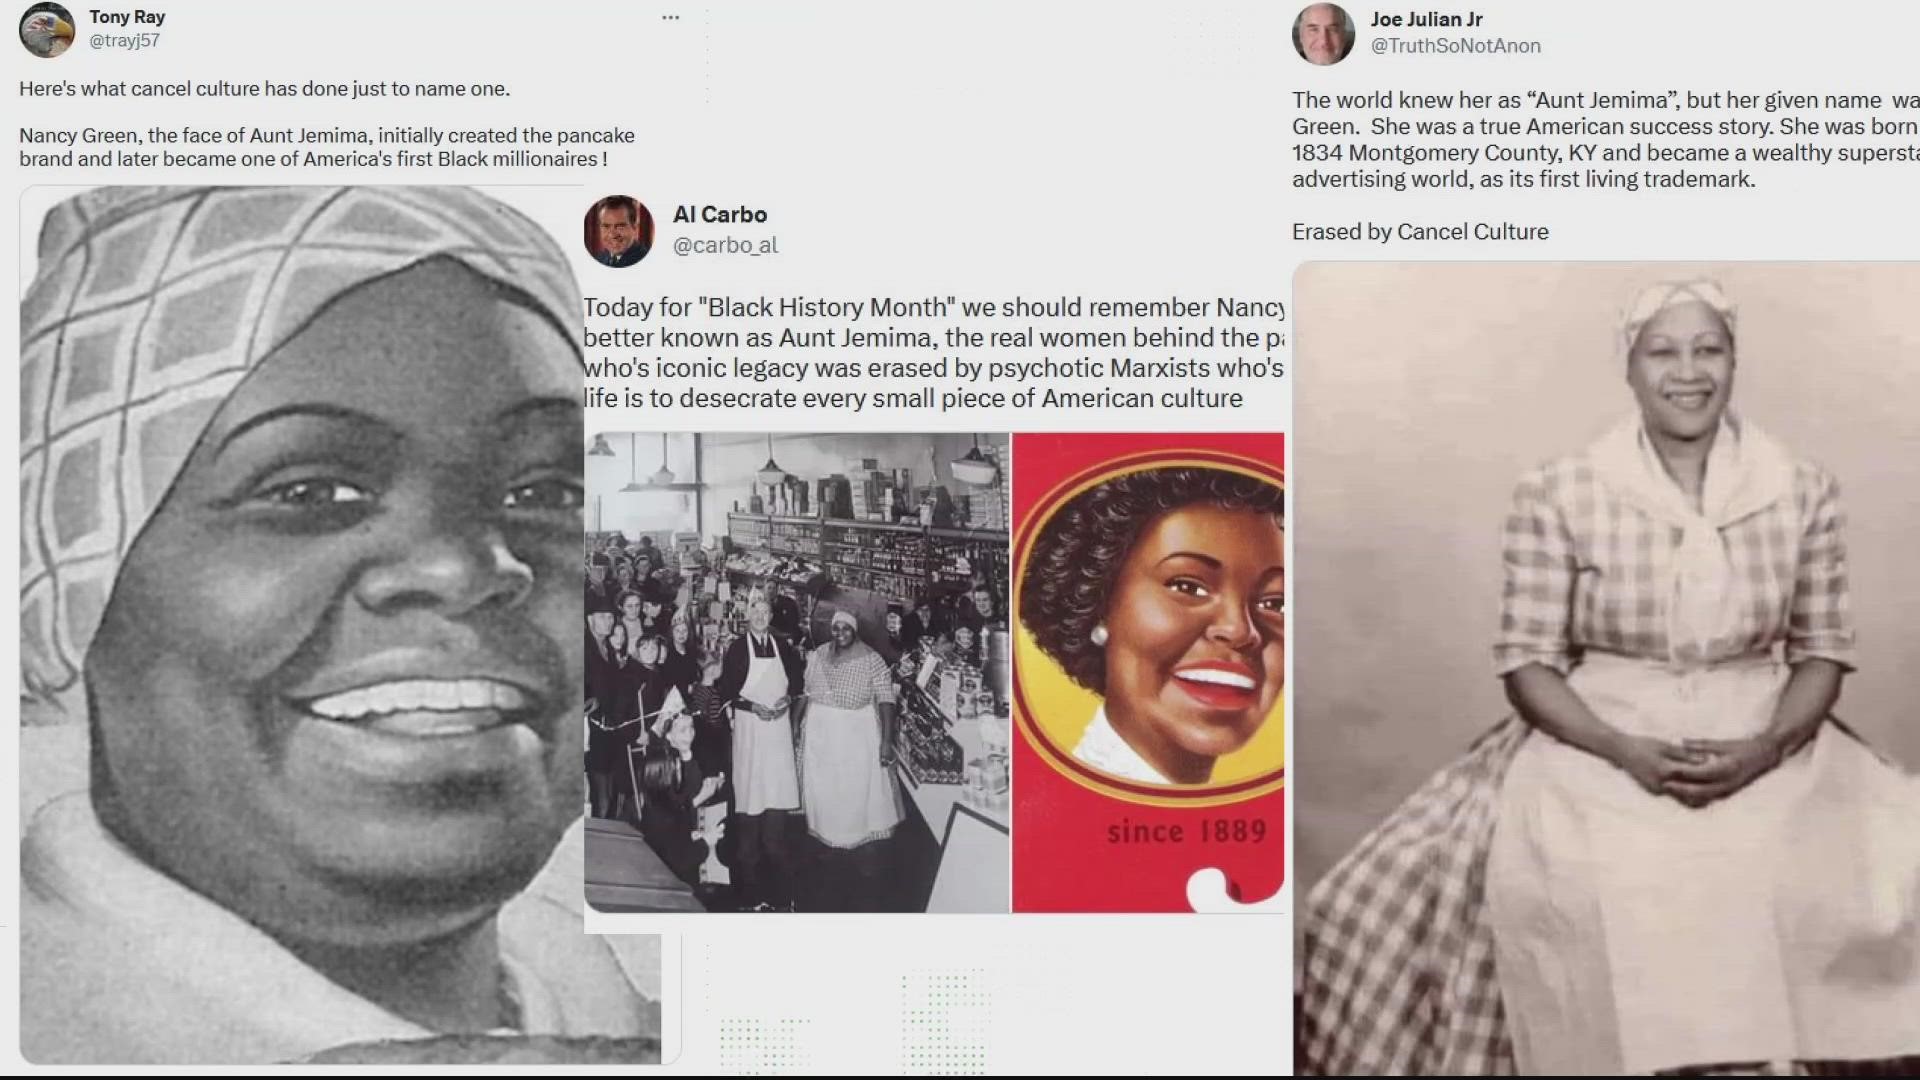 This week social media got a little sticky when actor Ben Stein complained about changes to Aunt Jemima brand pancake mix and syrup on his truth social account.